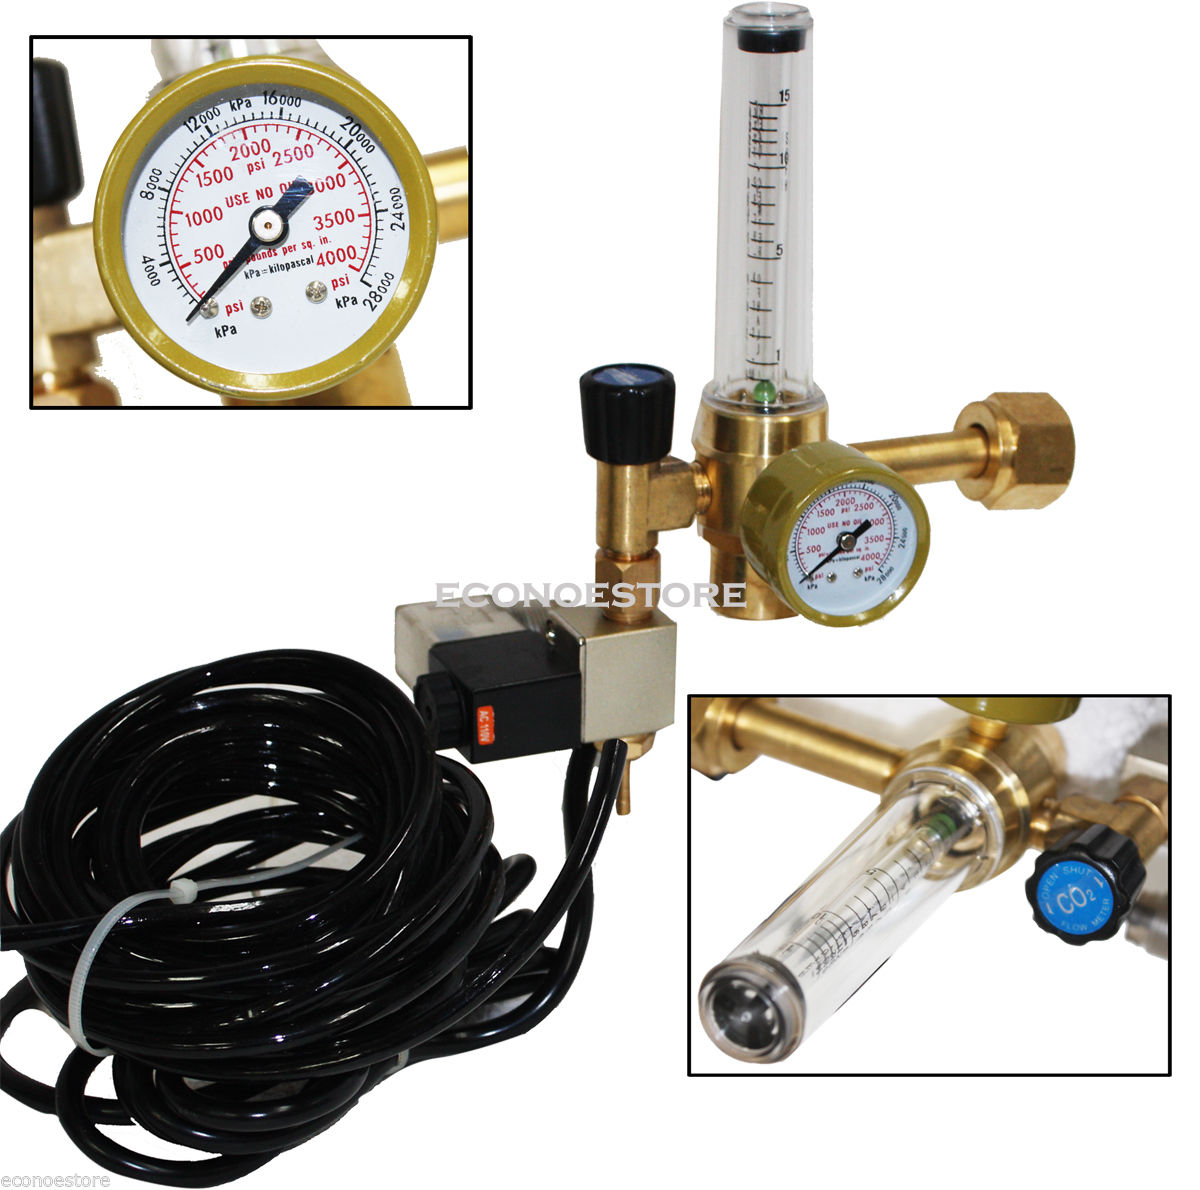 CO2 Hydroponics Regulator Emitter System with Solenoid Valve and Flow Meter